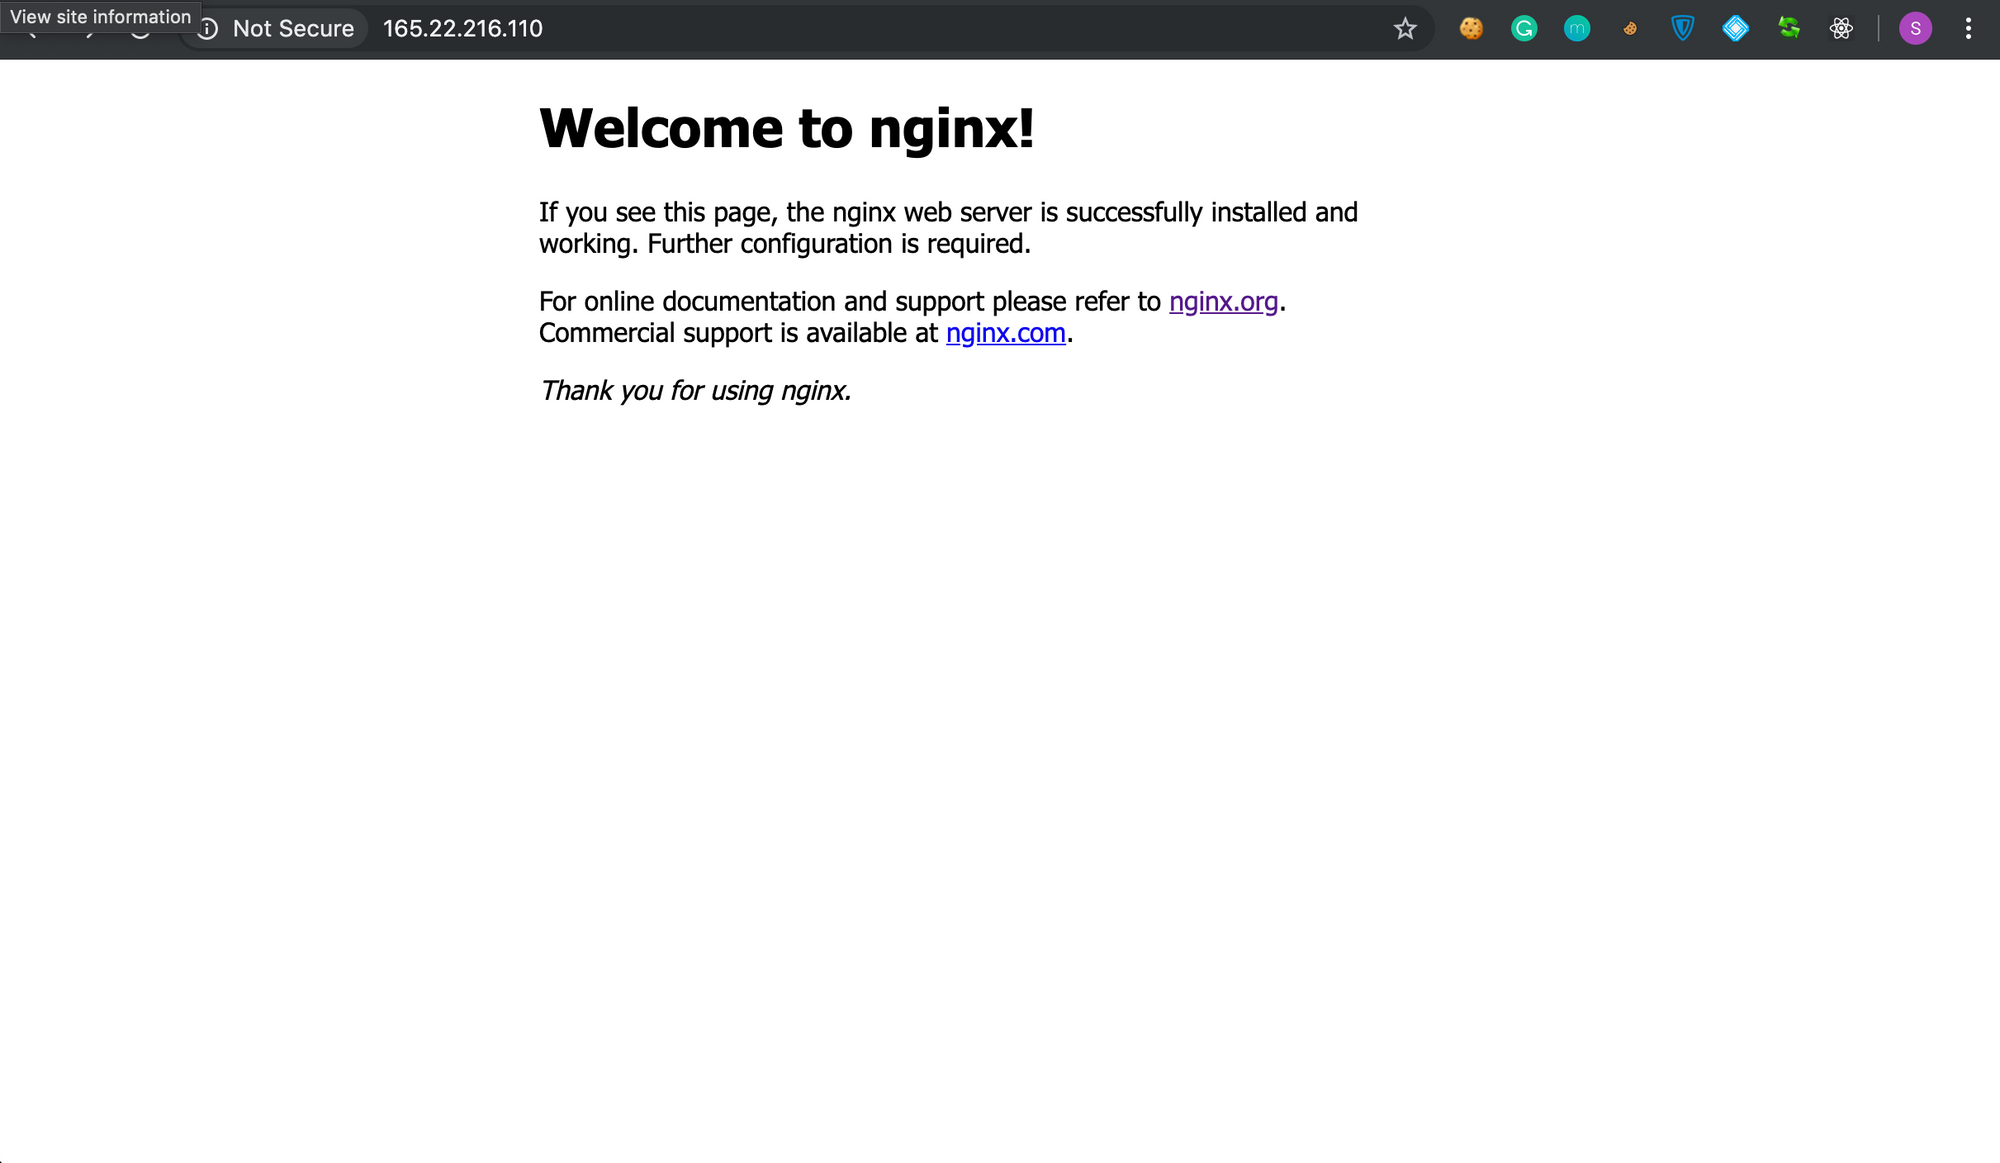 Hosting public services on your home server using NGINX and Tailscale